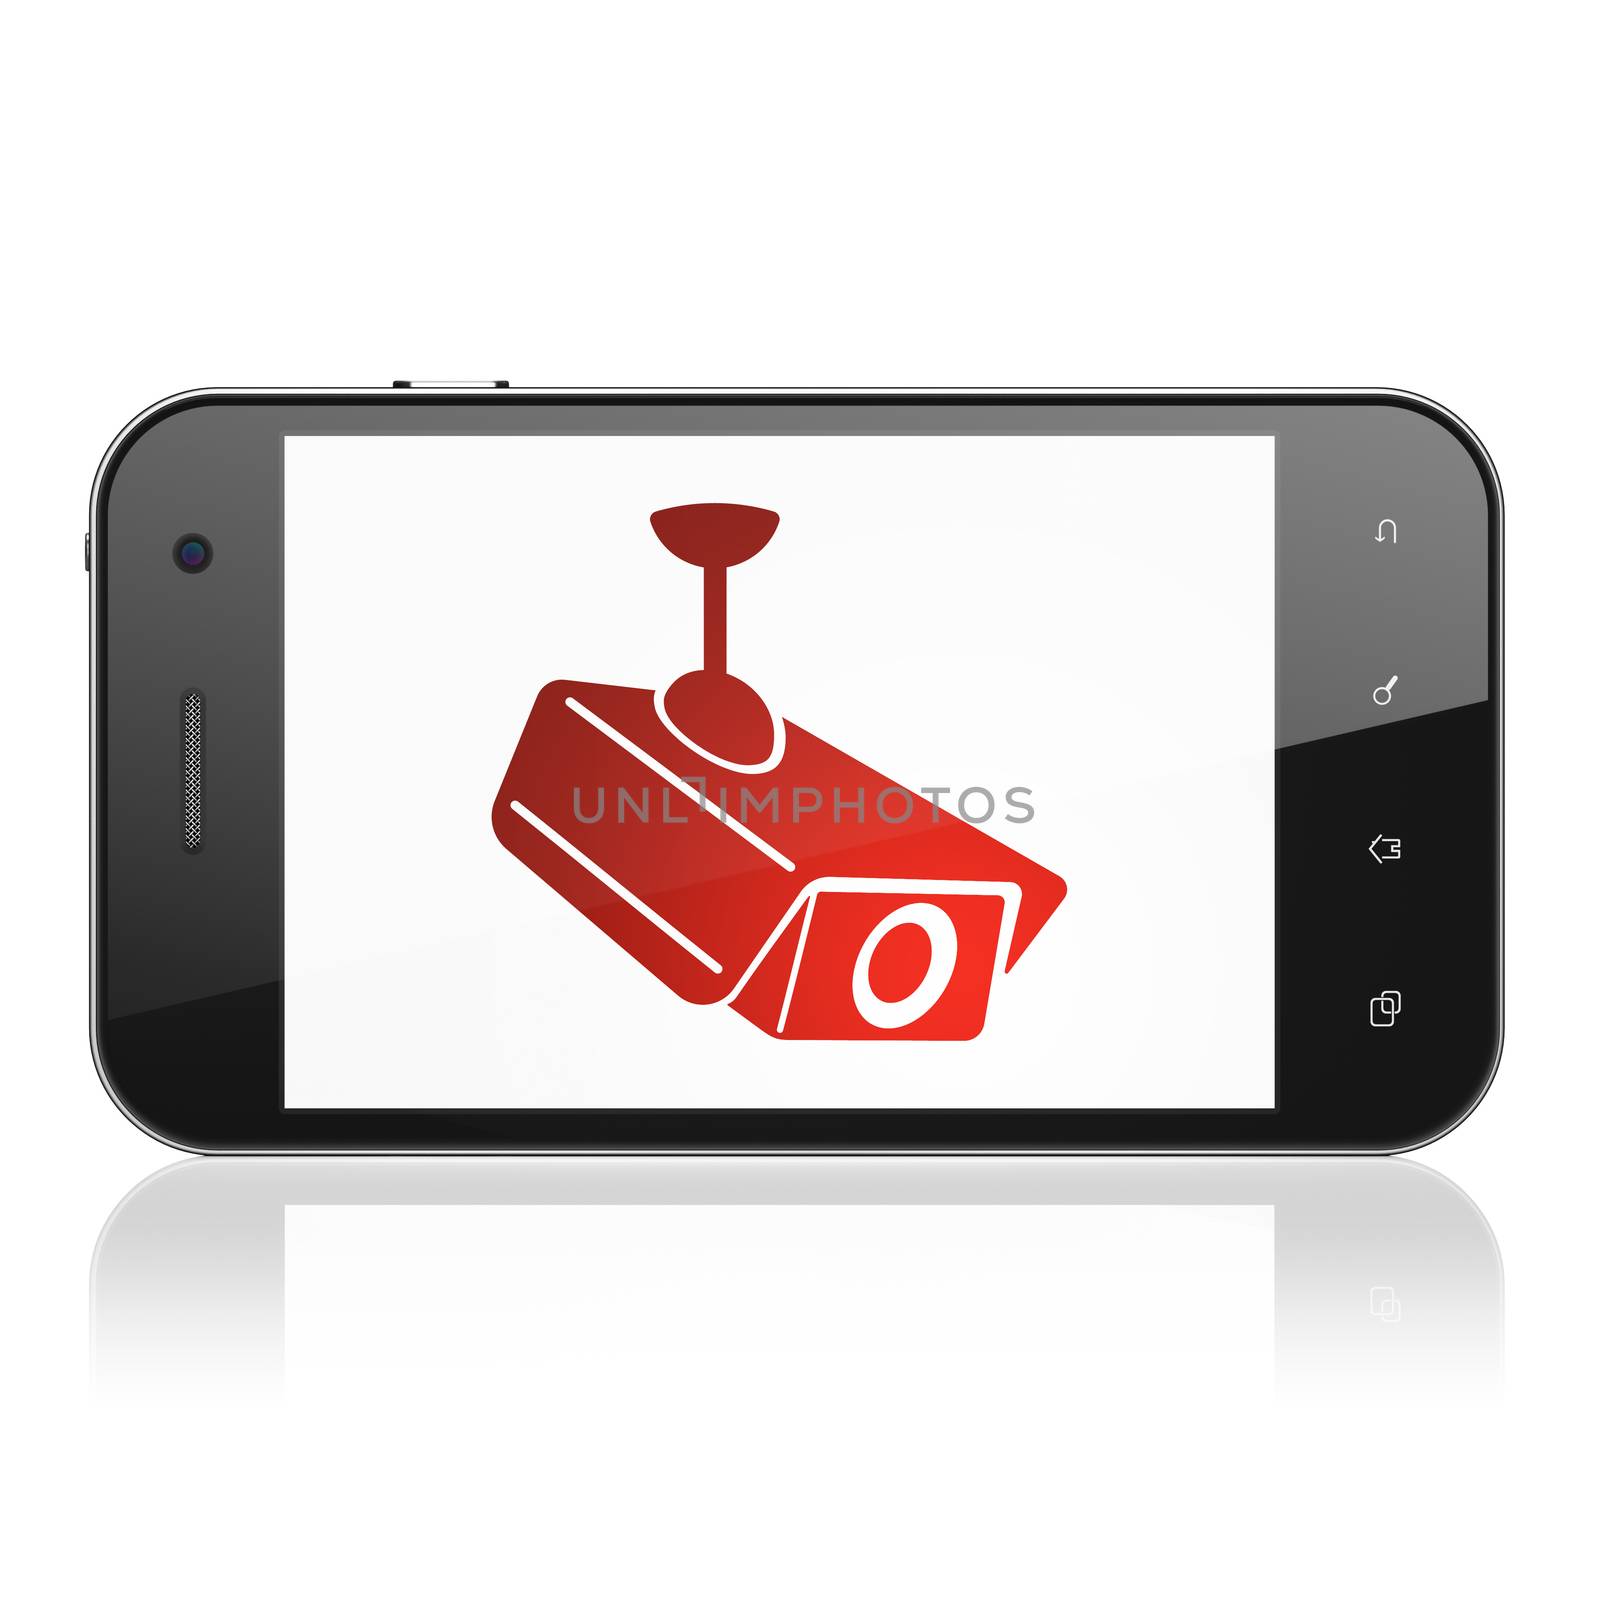 Protection concept: smartphone with Cctv Camera icon on display. Mobile smart phone on White background, cell phone 3d render